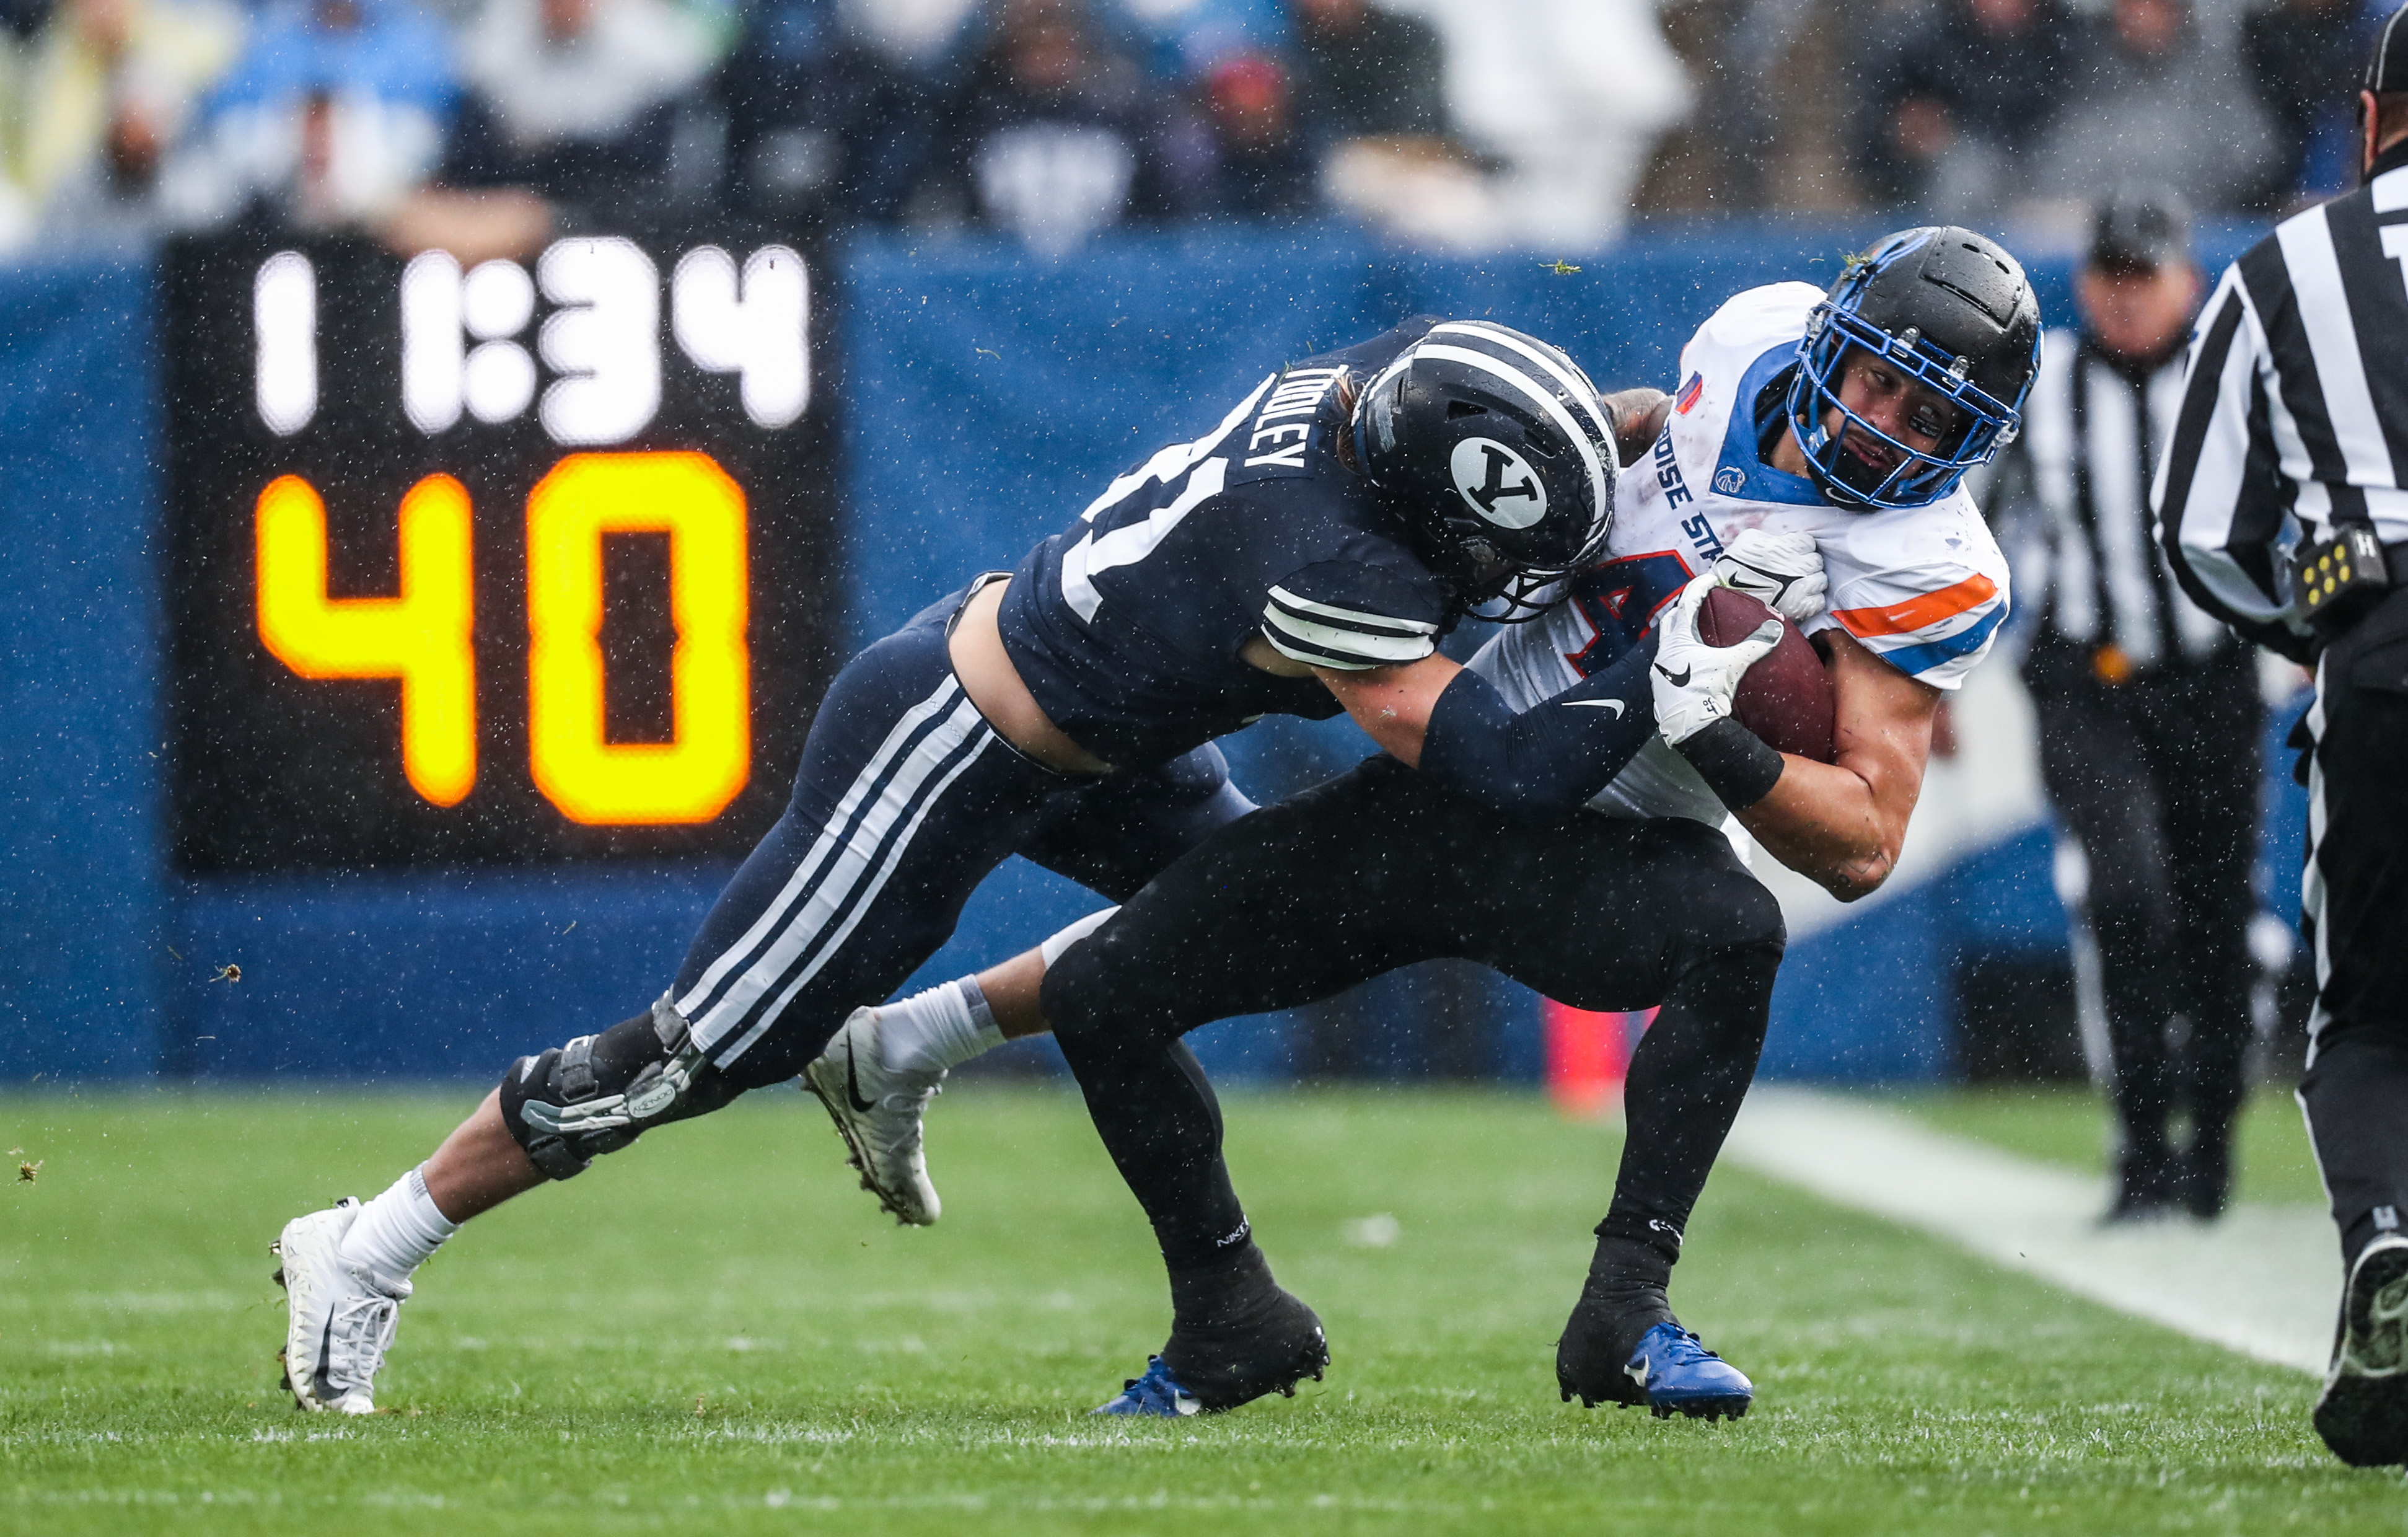 Max Tooley makes tackle against Boise State.